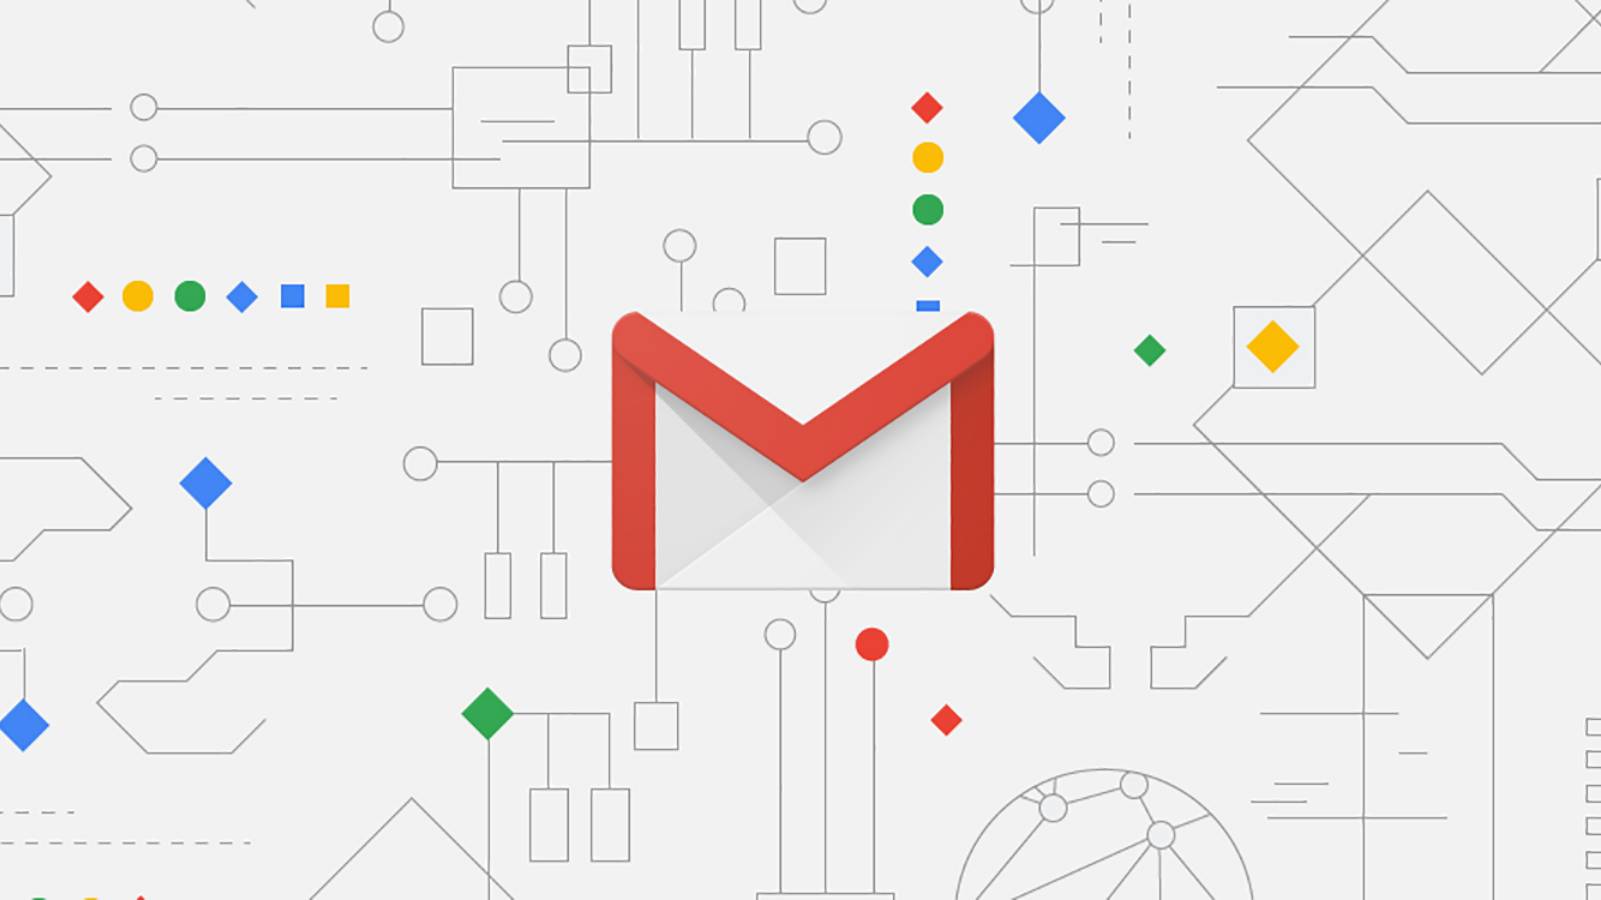 GMAIL has updated its application for iPhone and Android, what's new?